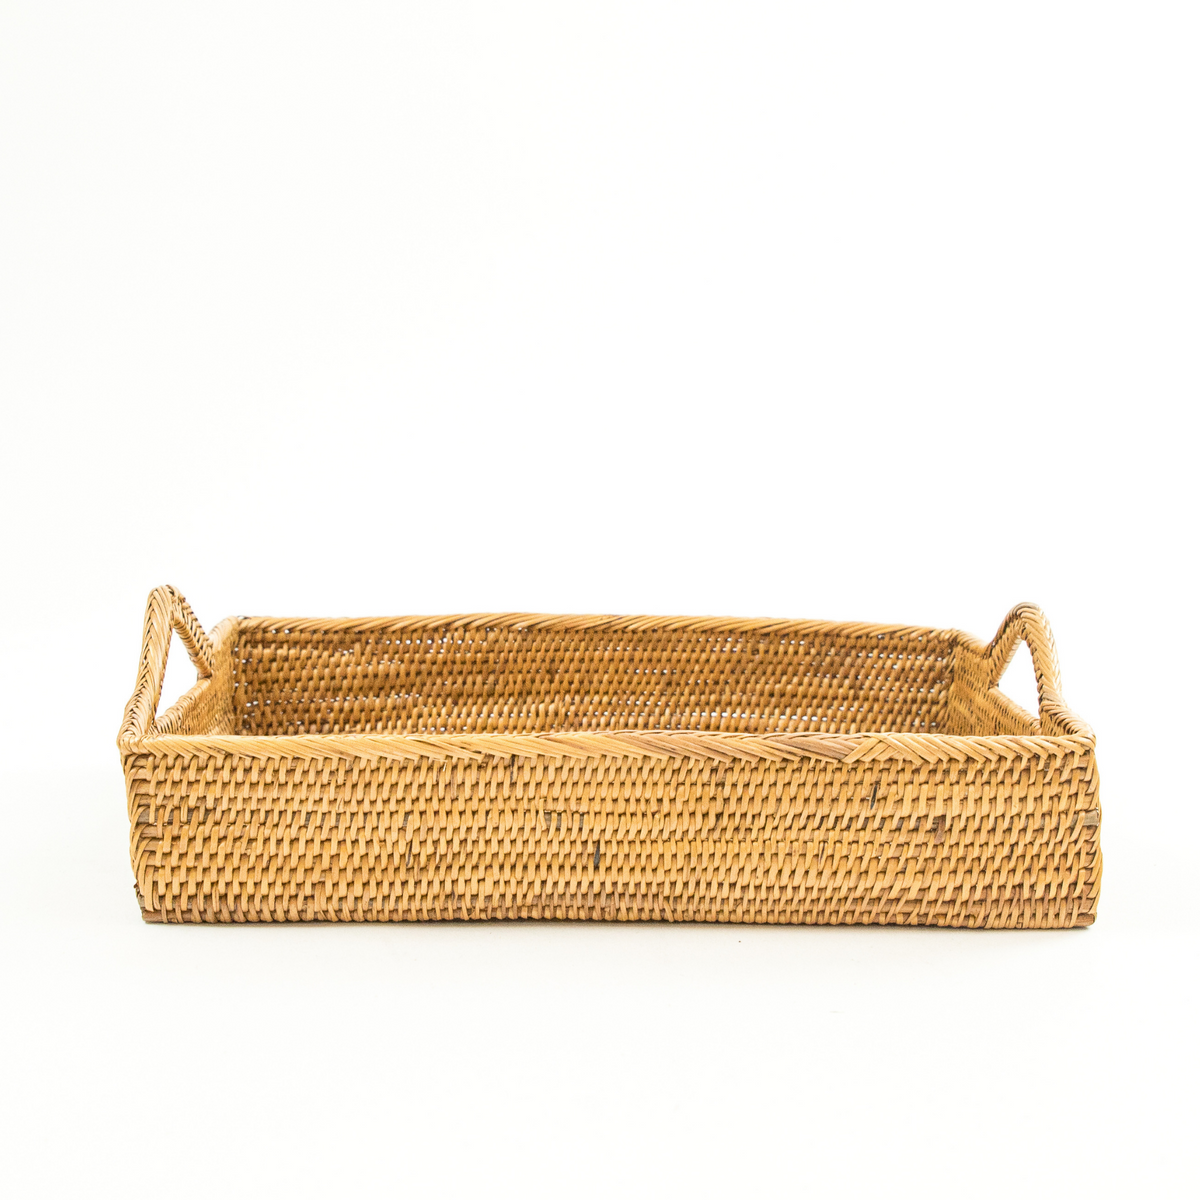 Ata reed basket with side handles (BSH2008)